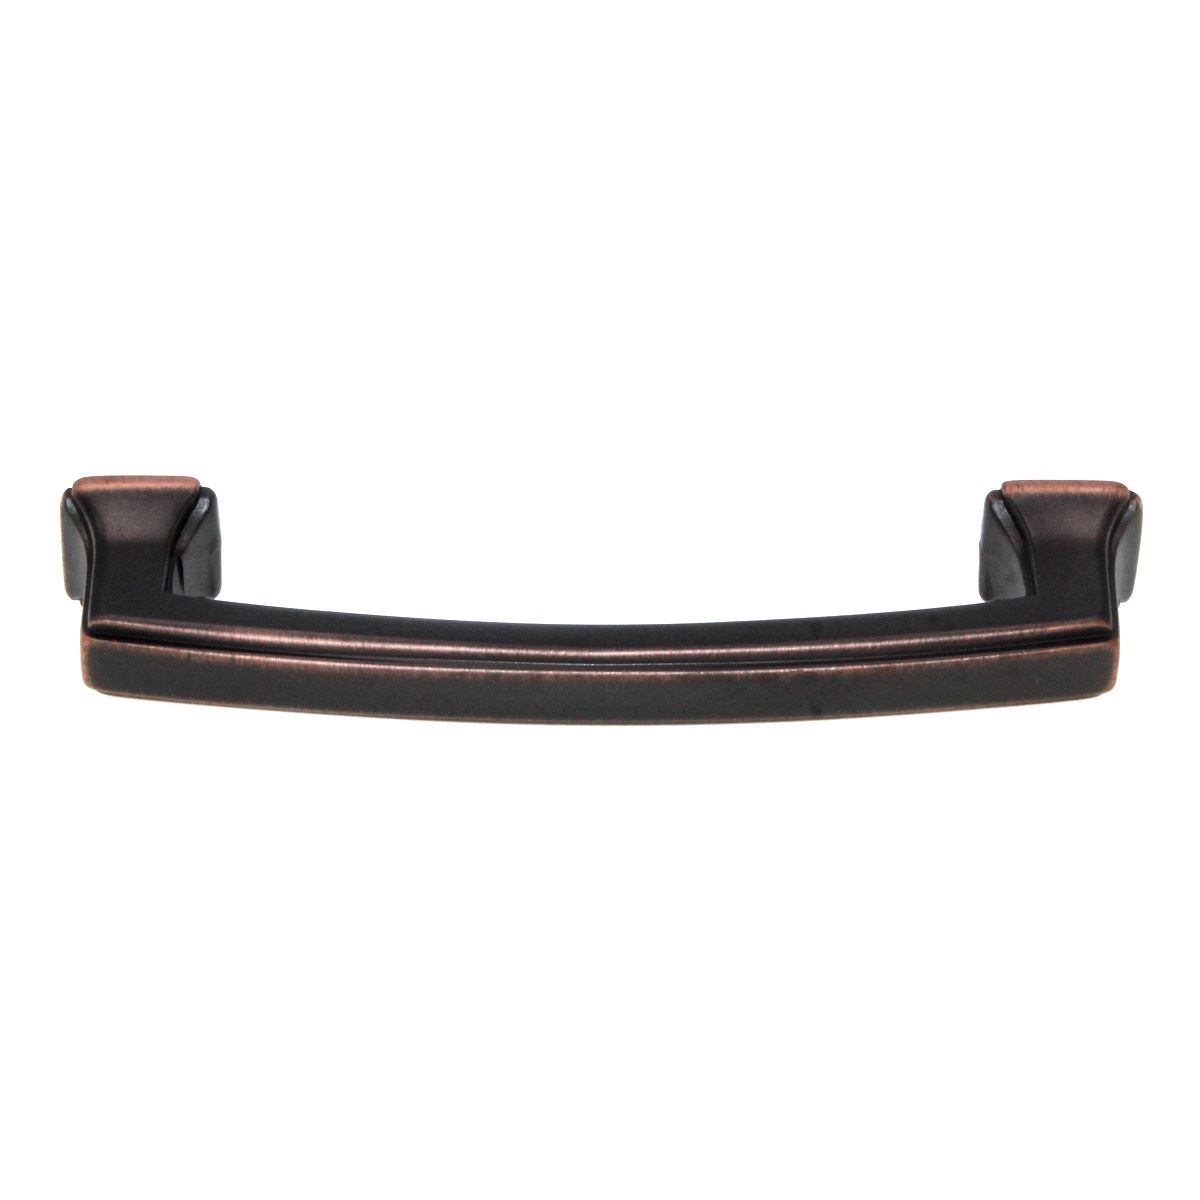 Hickory Hardware Bridges 3 3/4" (96mm) Ctr Pull Oil-Rubbed Bronze HLD P3232-OBH